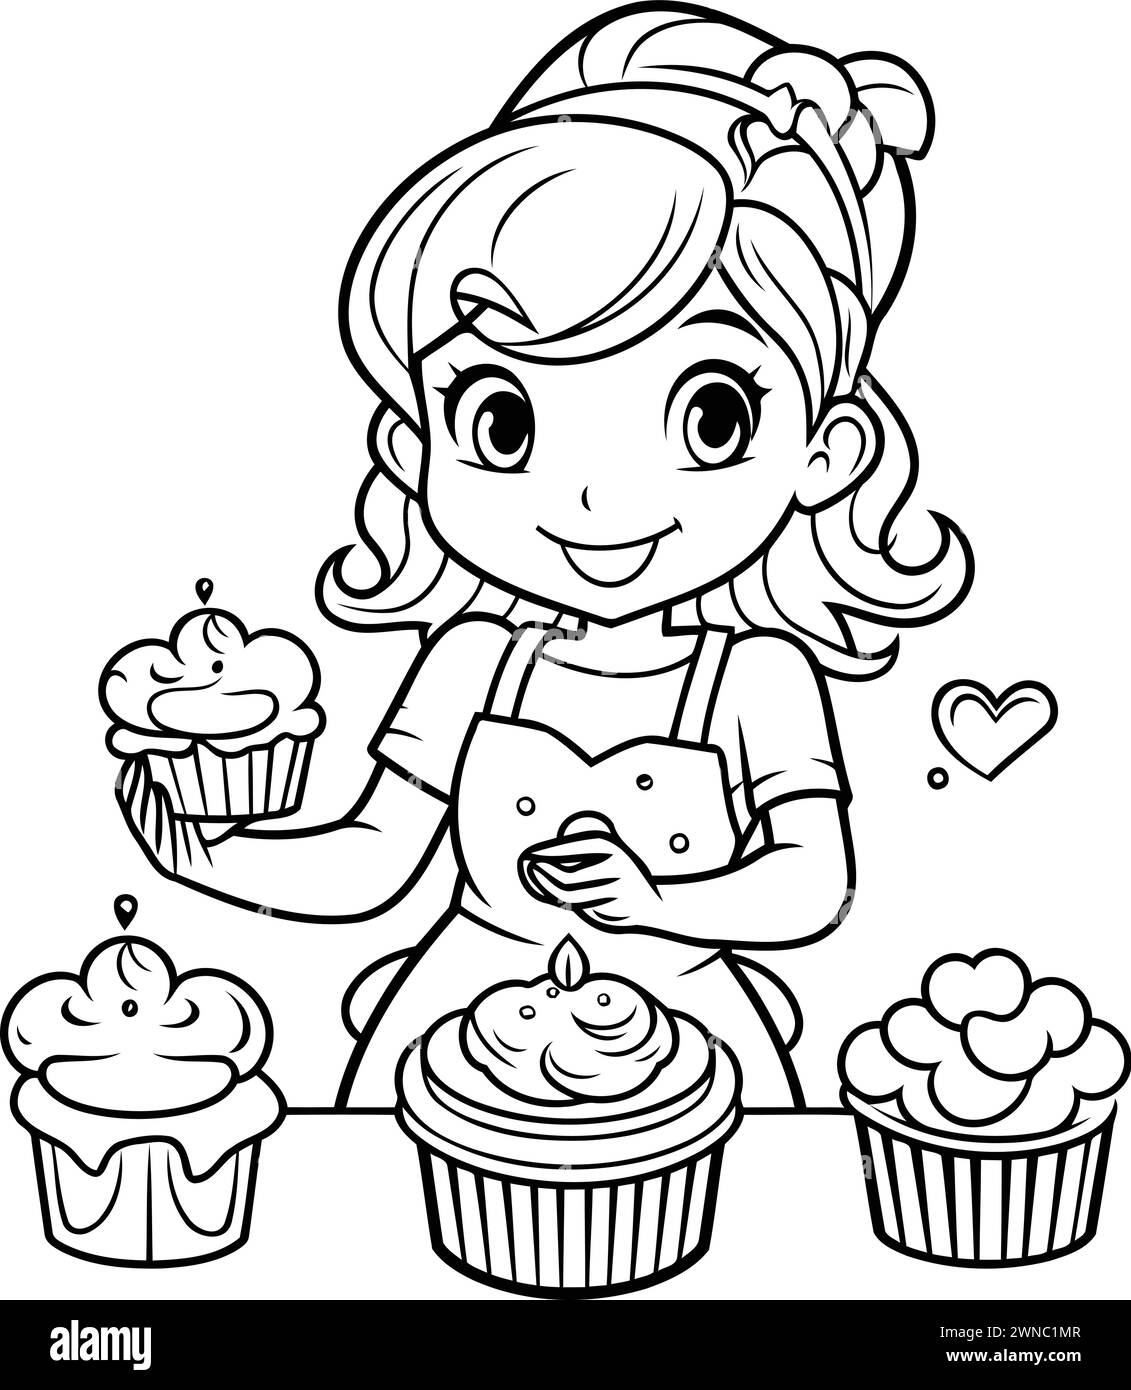 Black and White Cartoon Illustration of Cute Little Girl with Cupcakes for Coloring Book Stock Vector